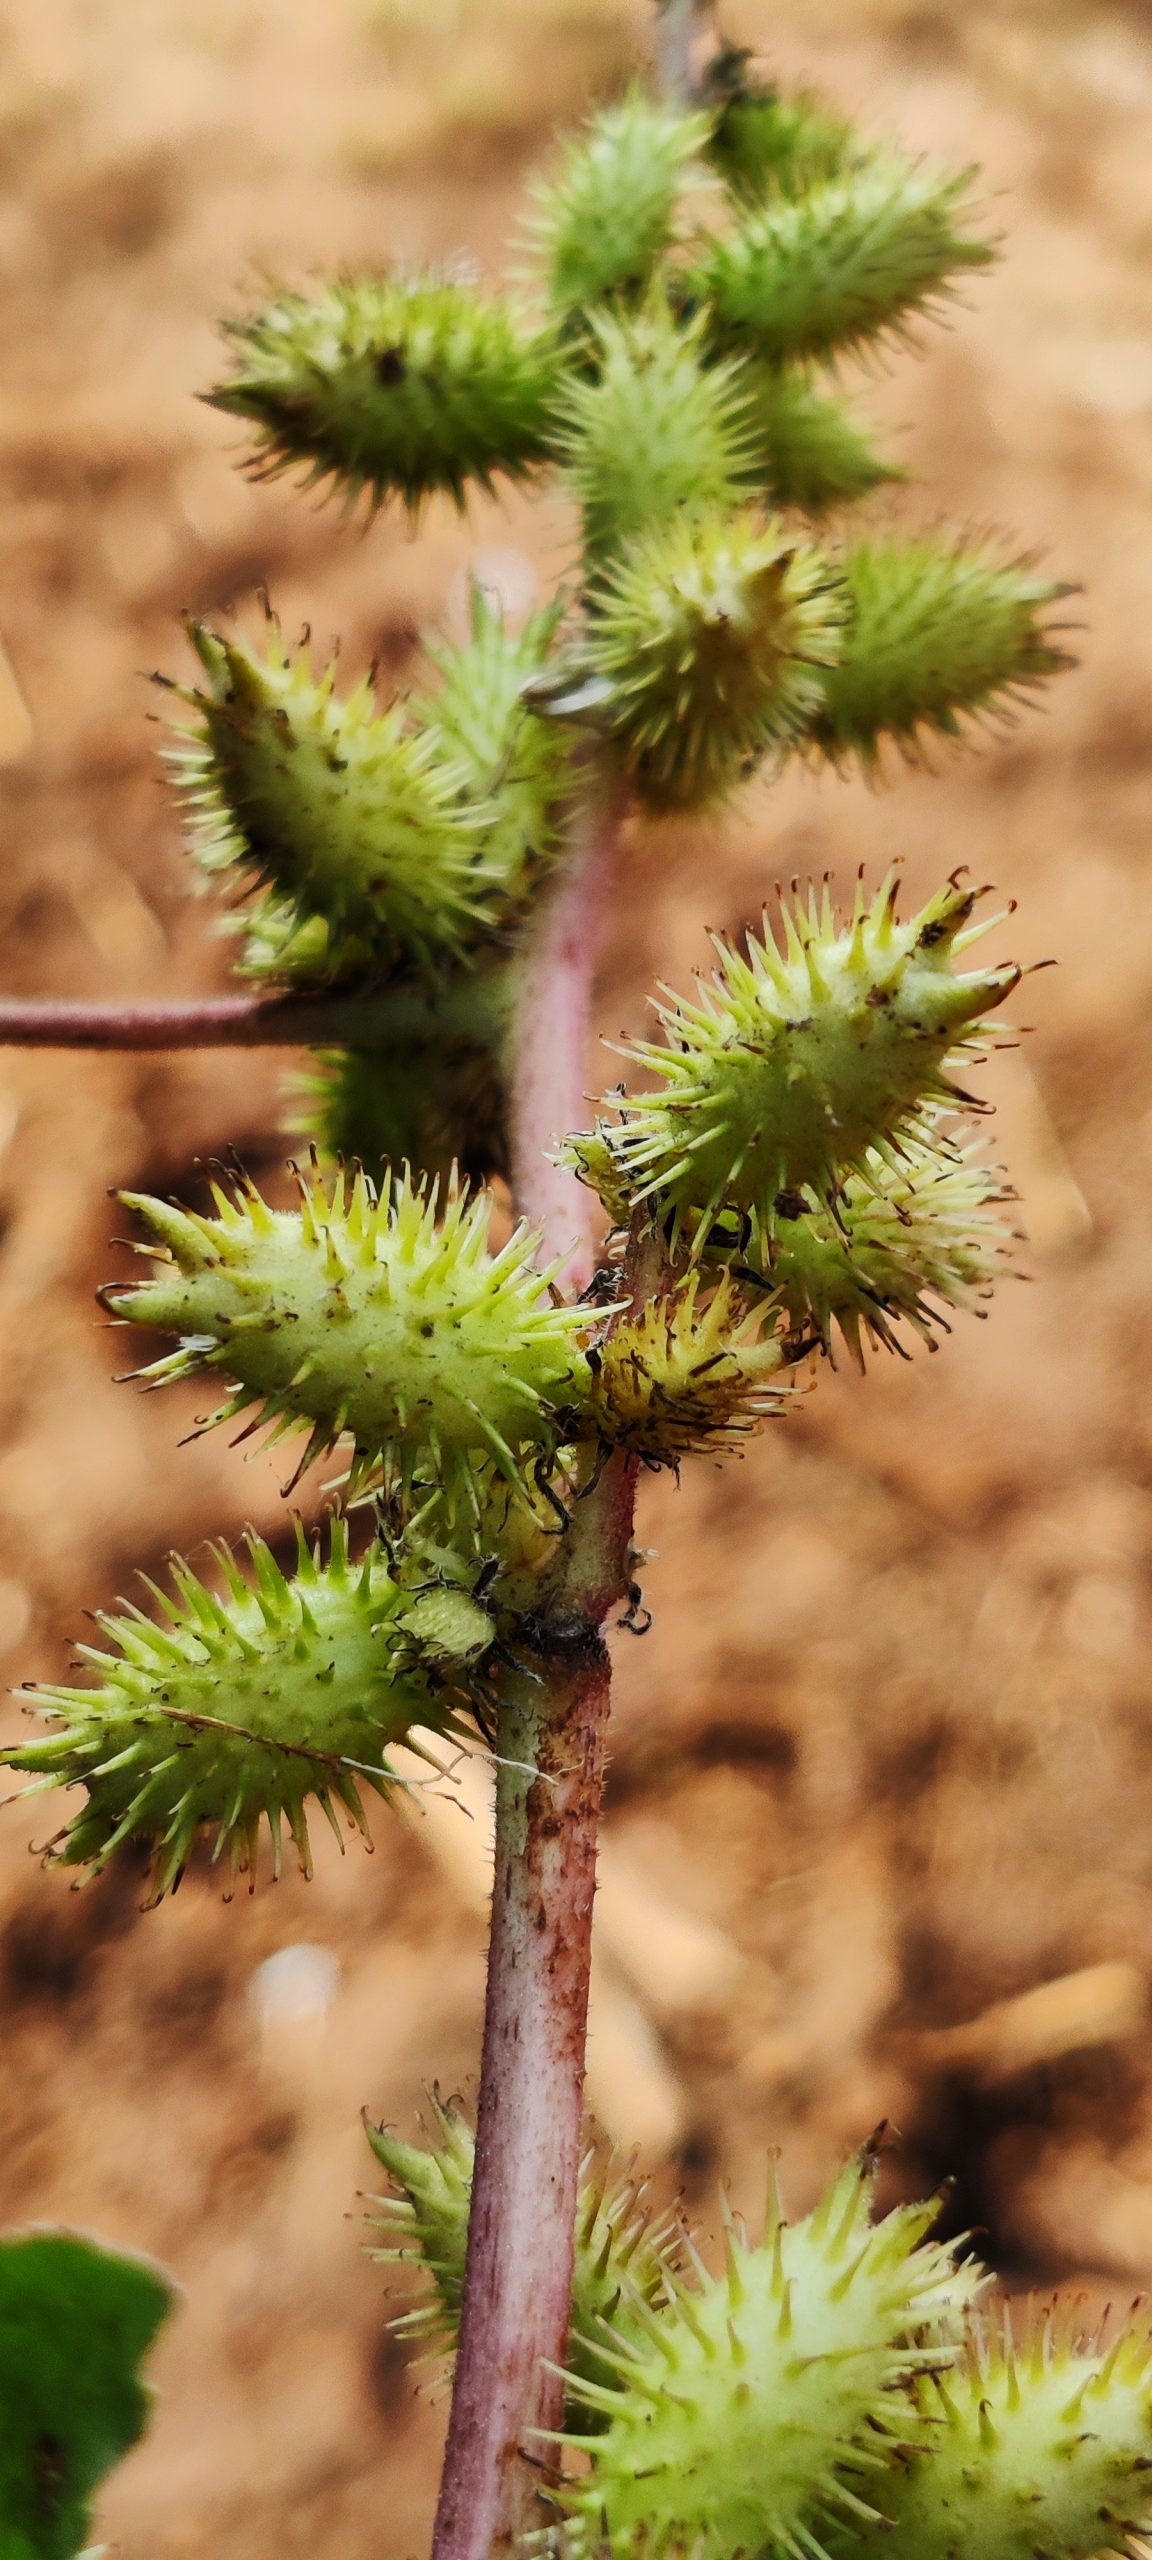 Rough cocklebur on its plant